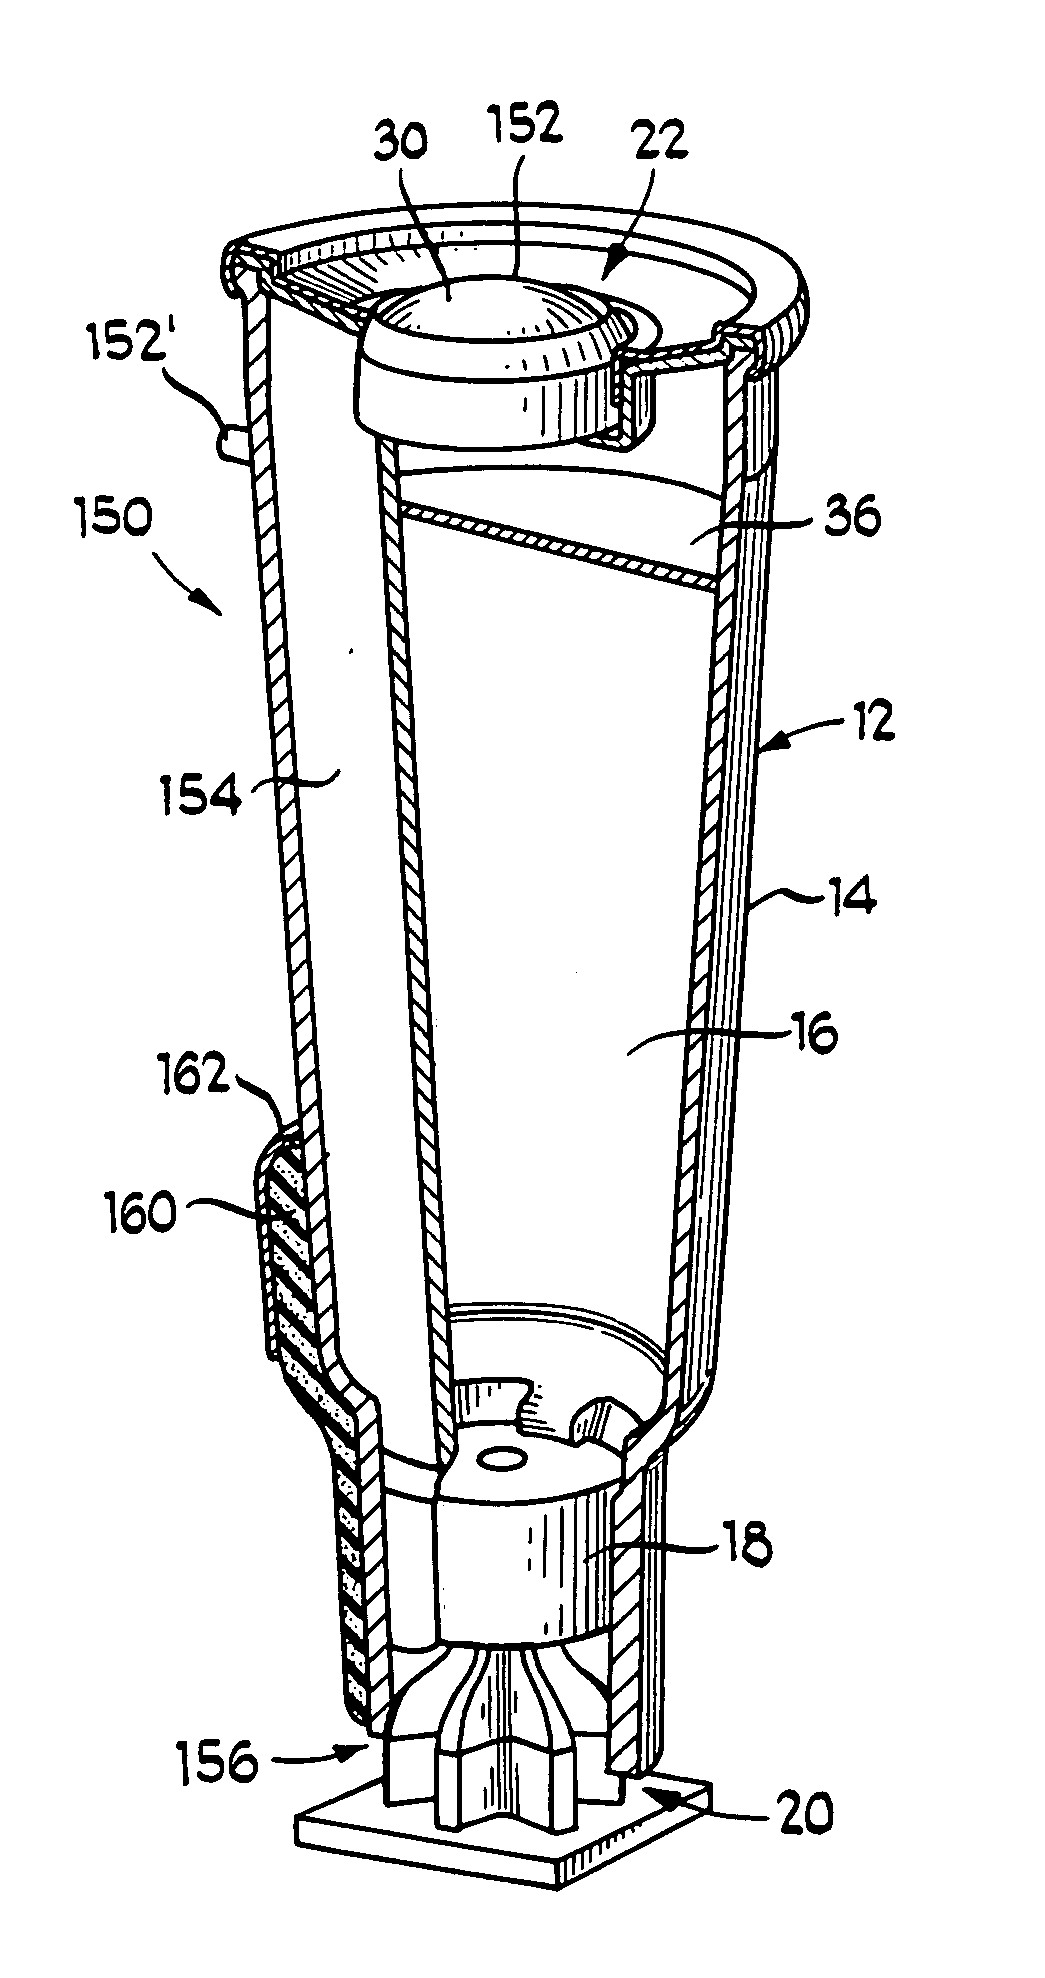 Foldable, refillable, sustained-release fluid delivery system